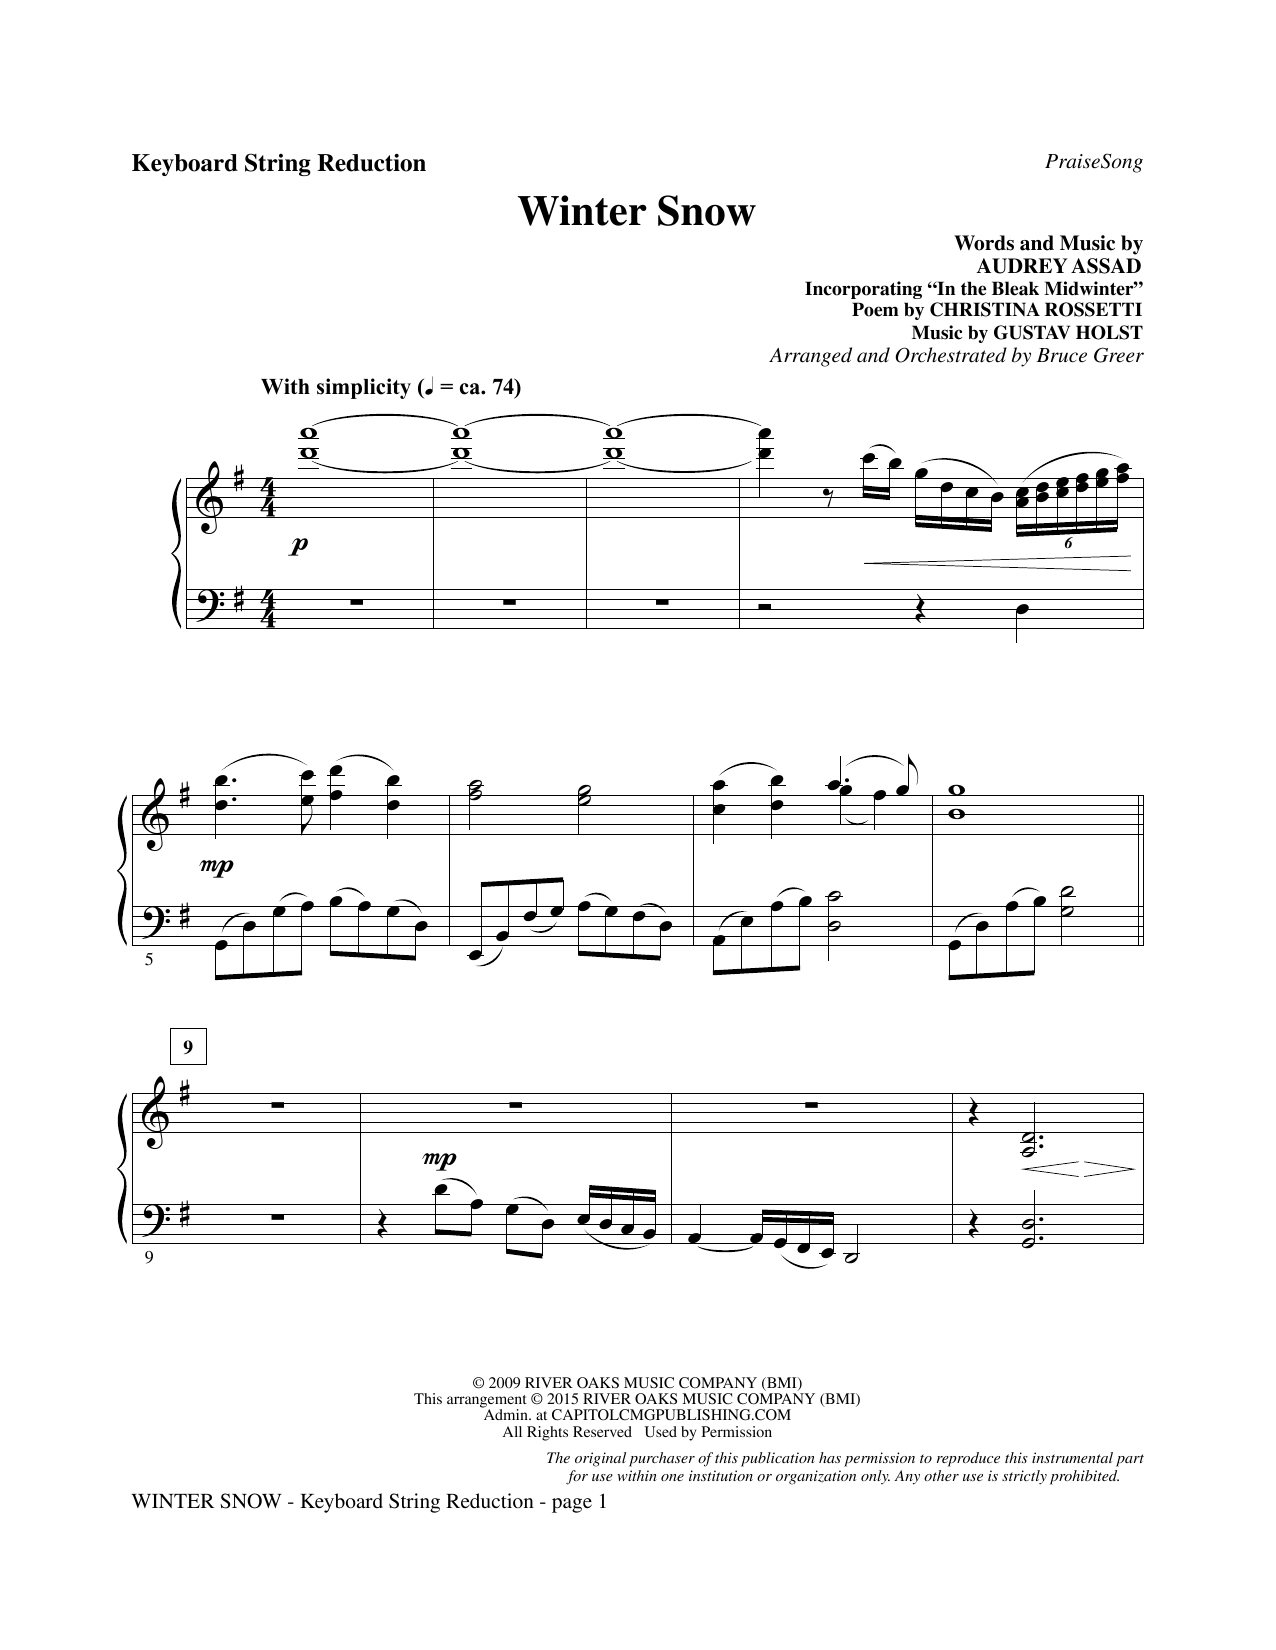 Bruce Greer Winter Snow - Keyboard String Reduction sheet music notes and chords. Download Printable PDF.